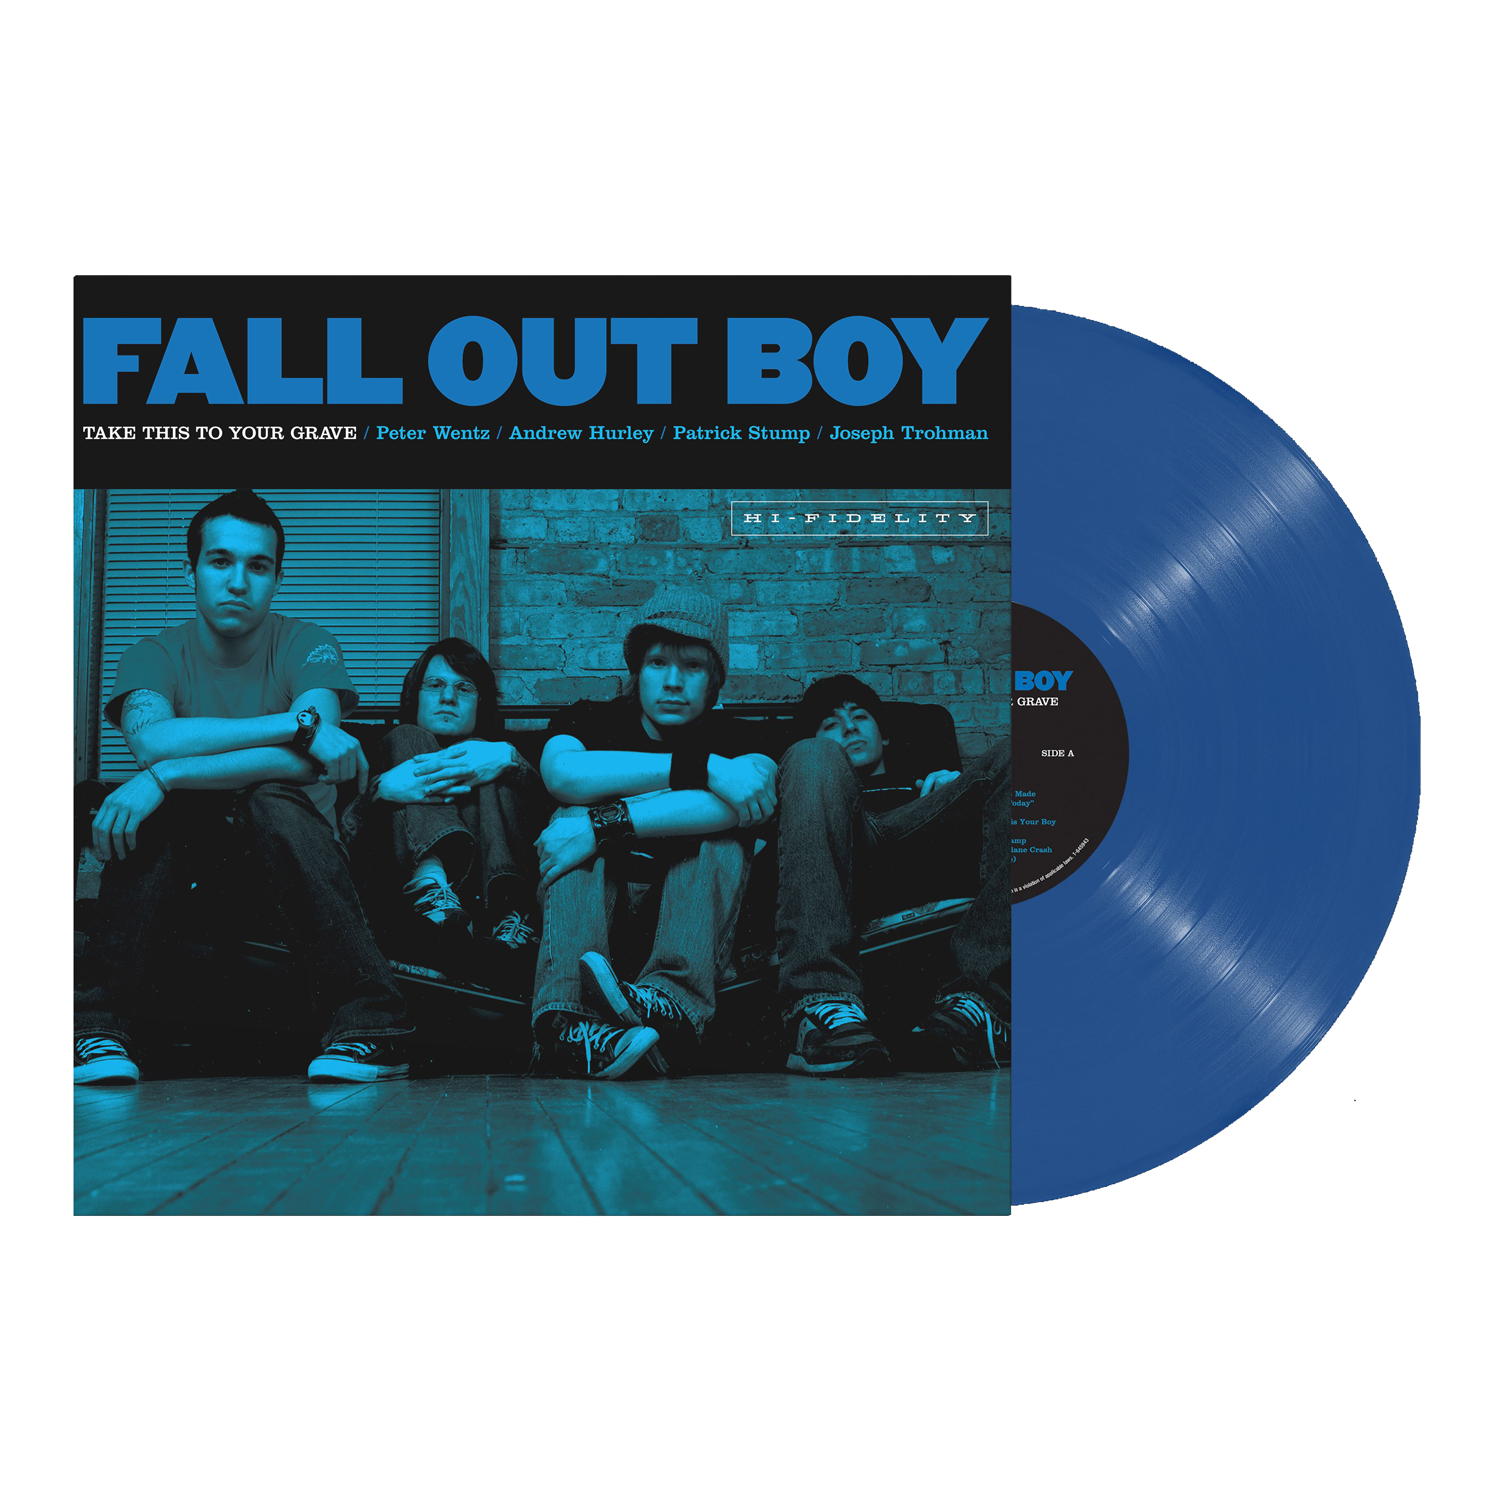 Fall Out Boy - Take This to Your Grave (20th Anniversary): Blue Jay Vinyl LP